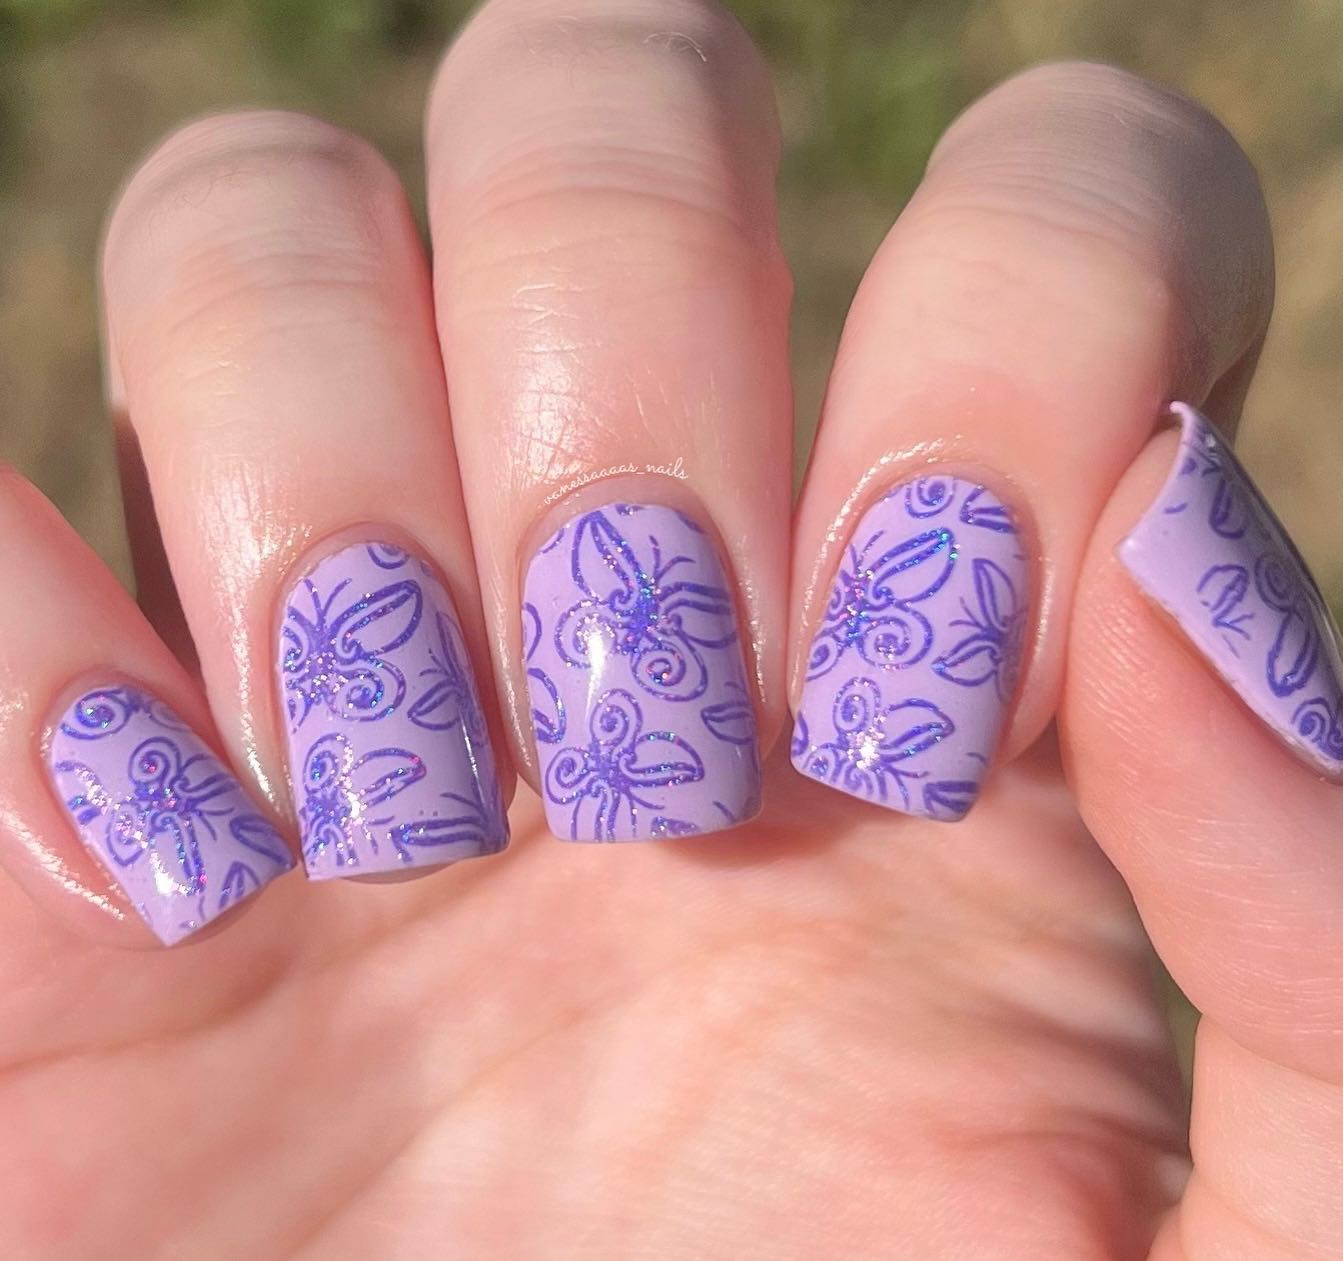 Perfect shade of purple and butterflies with a darker tone of it suit very well with each other. This manicure will make you feel cool and cute at the same time.